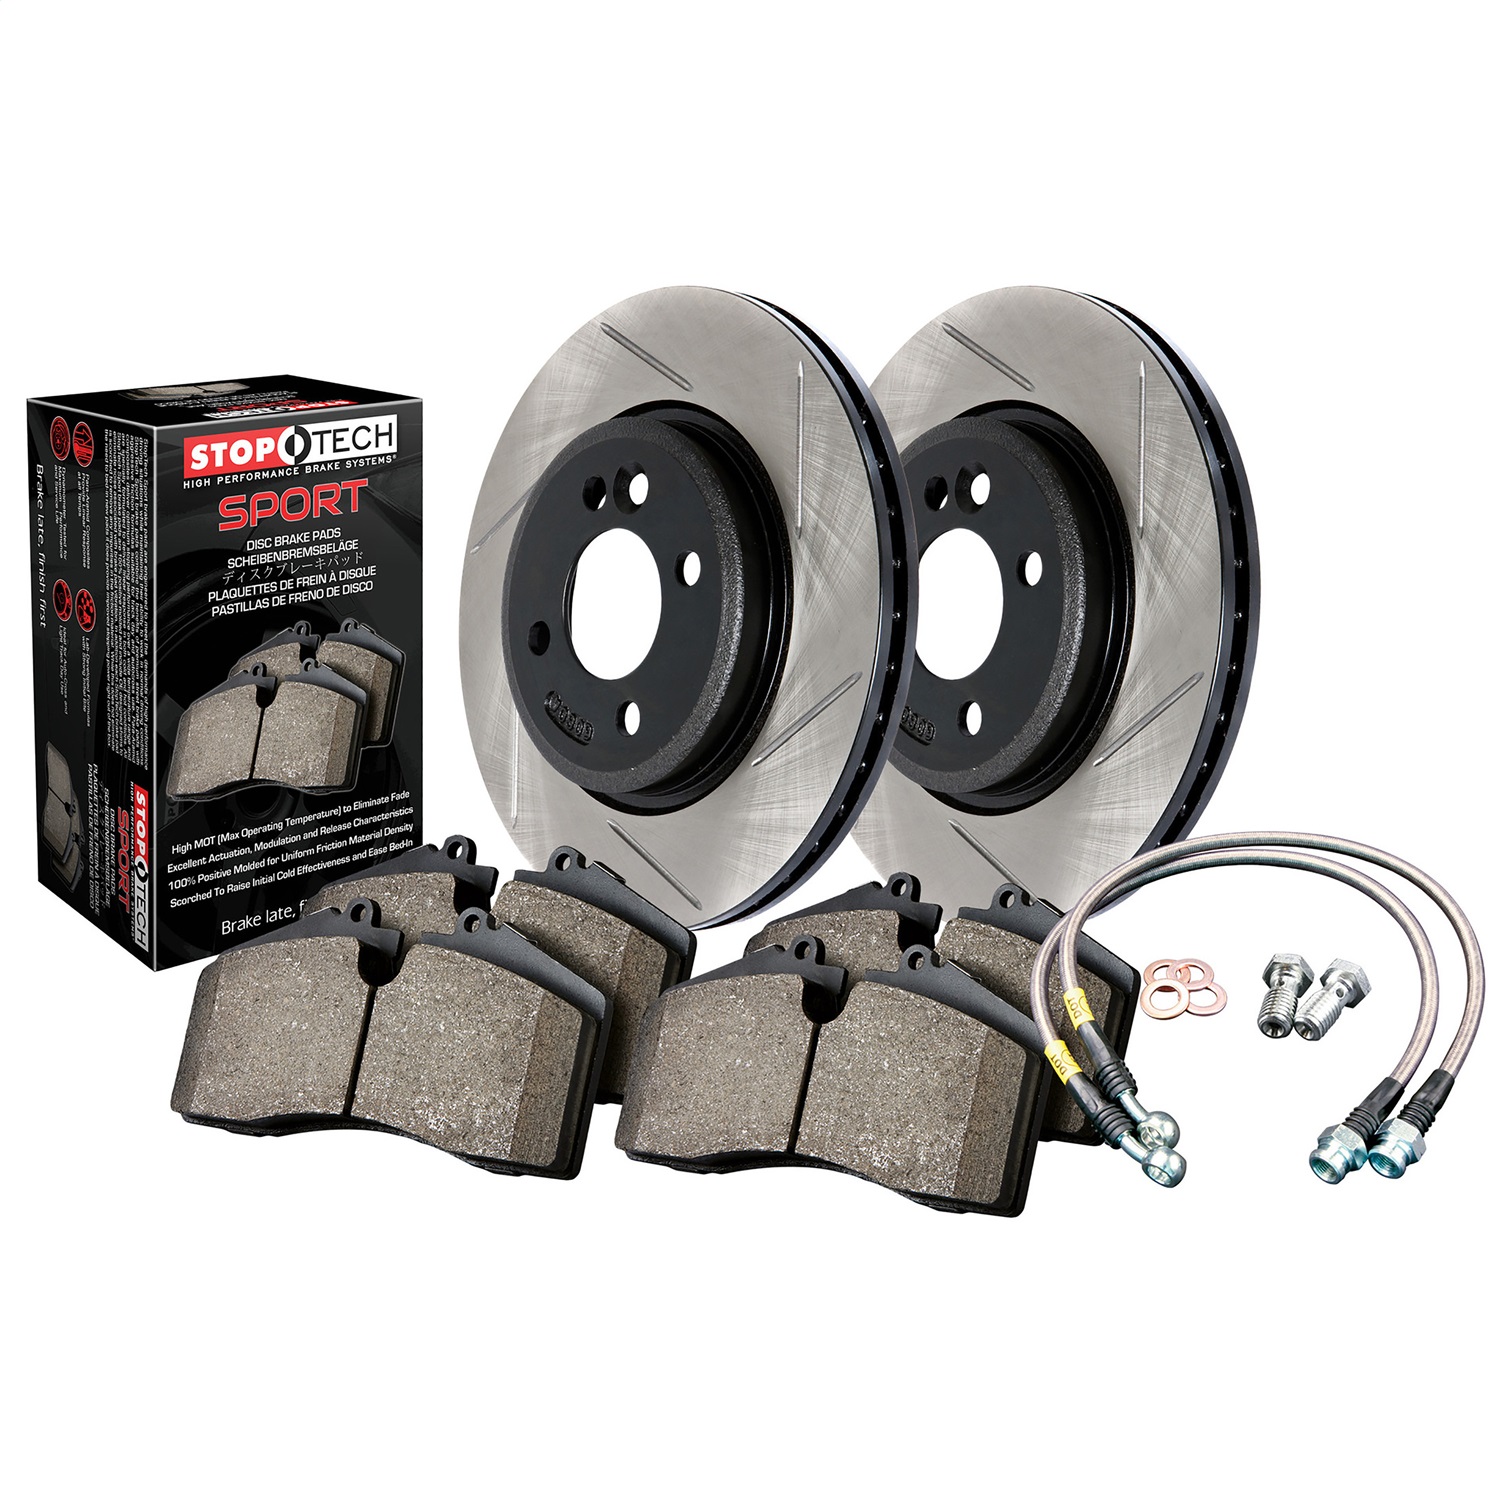 StopTech 977.33034F Sport Disc Brake Kit w/Slotted Rotors